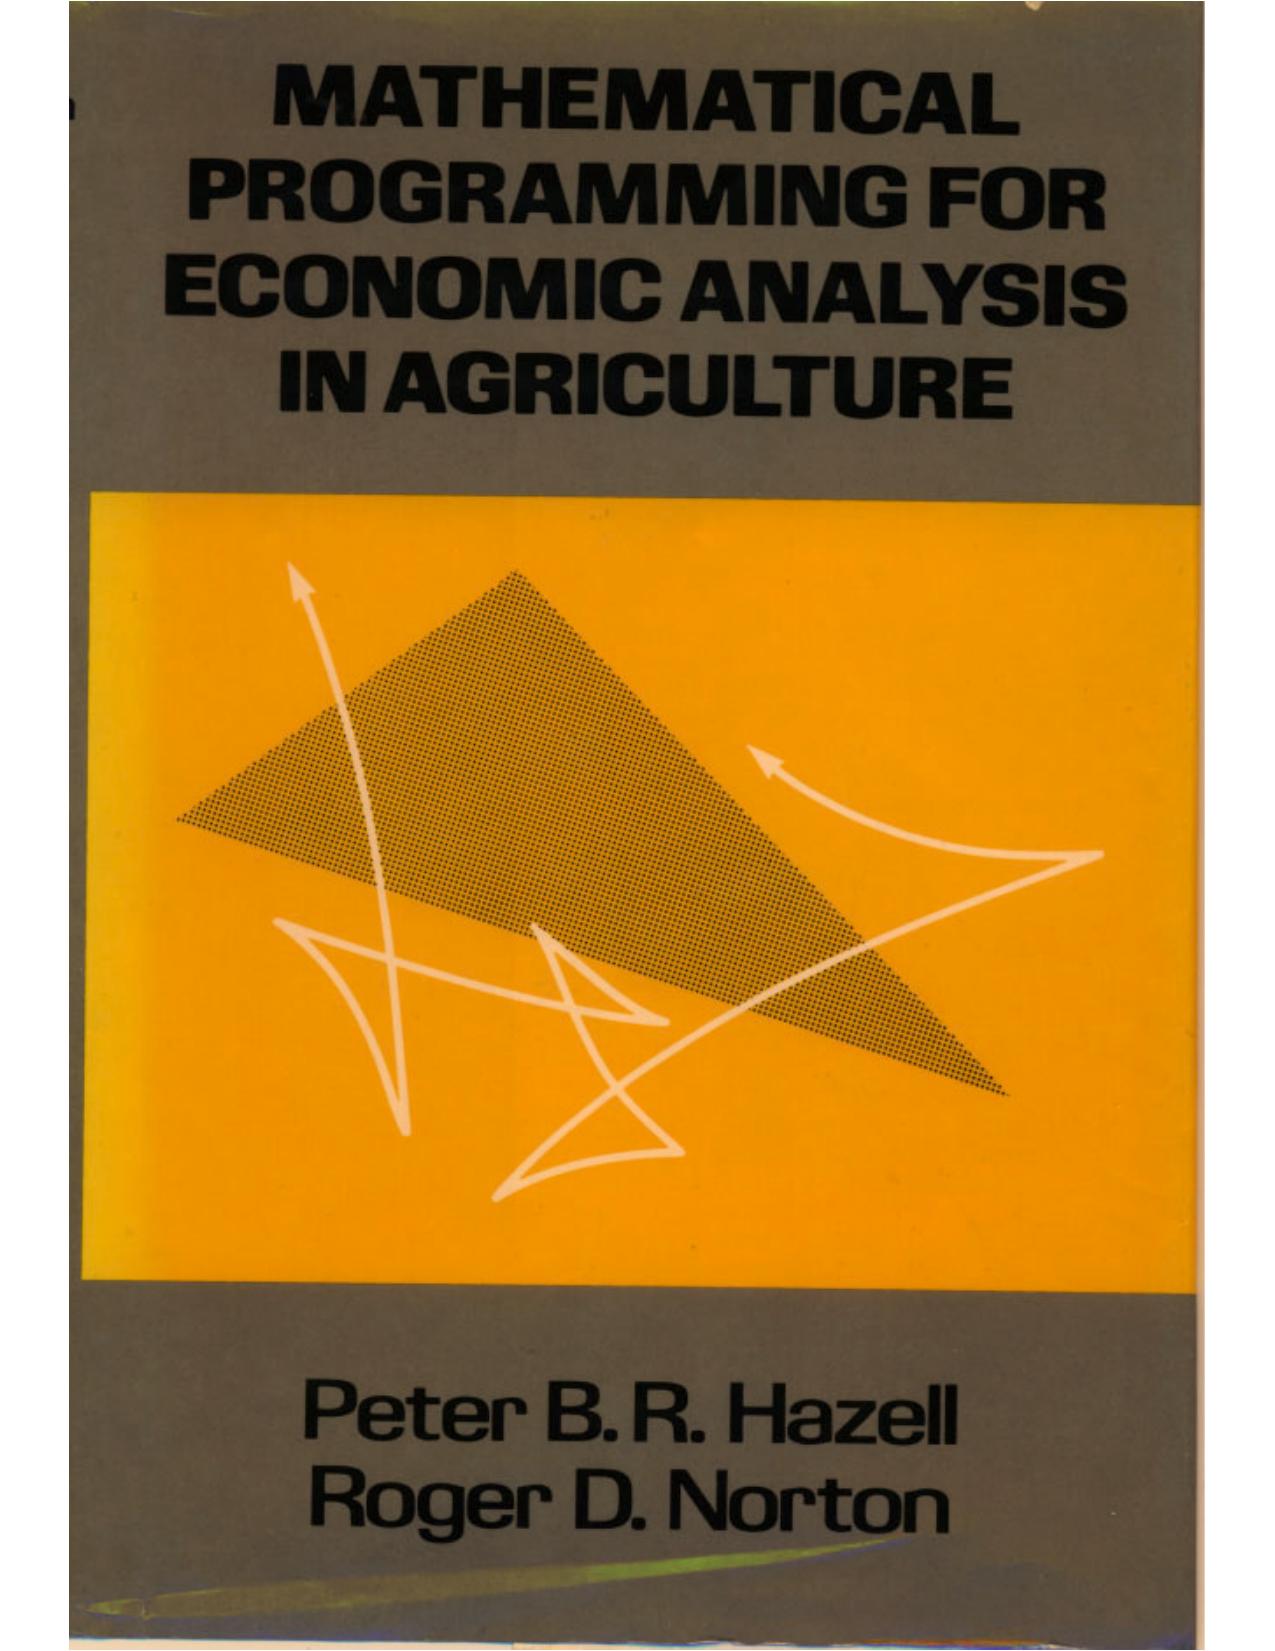 Mathematical Programming for Economic Analysis in Agriculture - full text